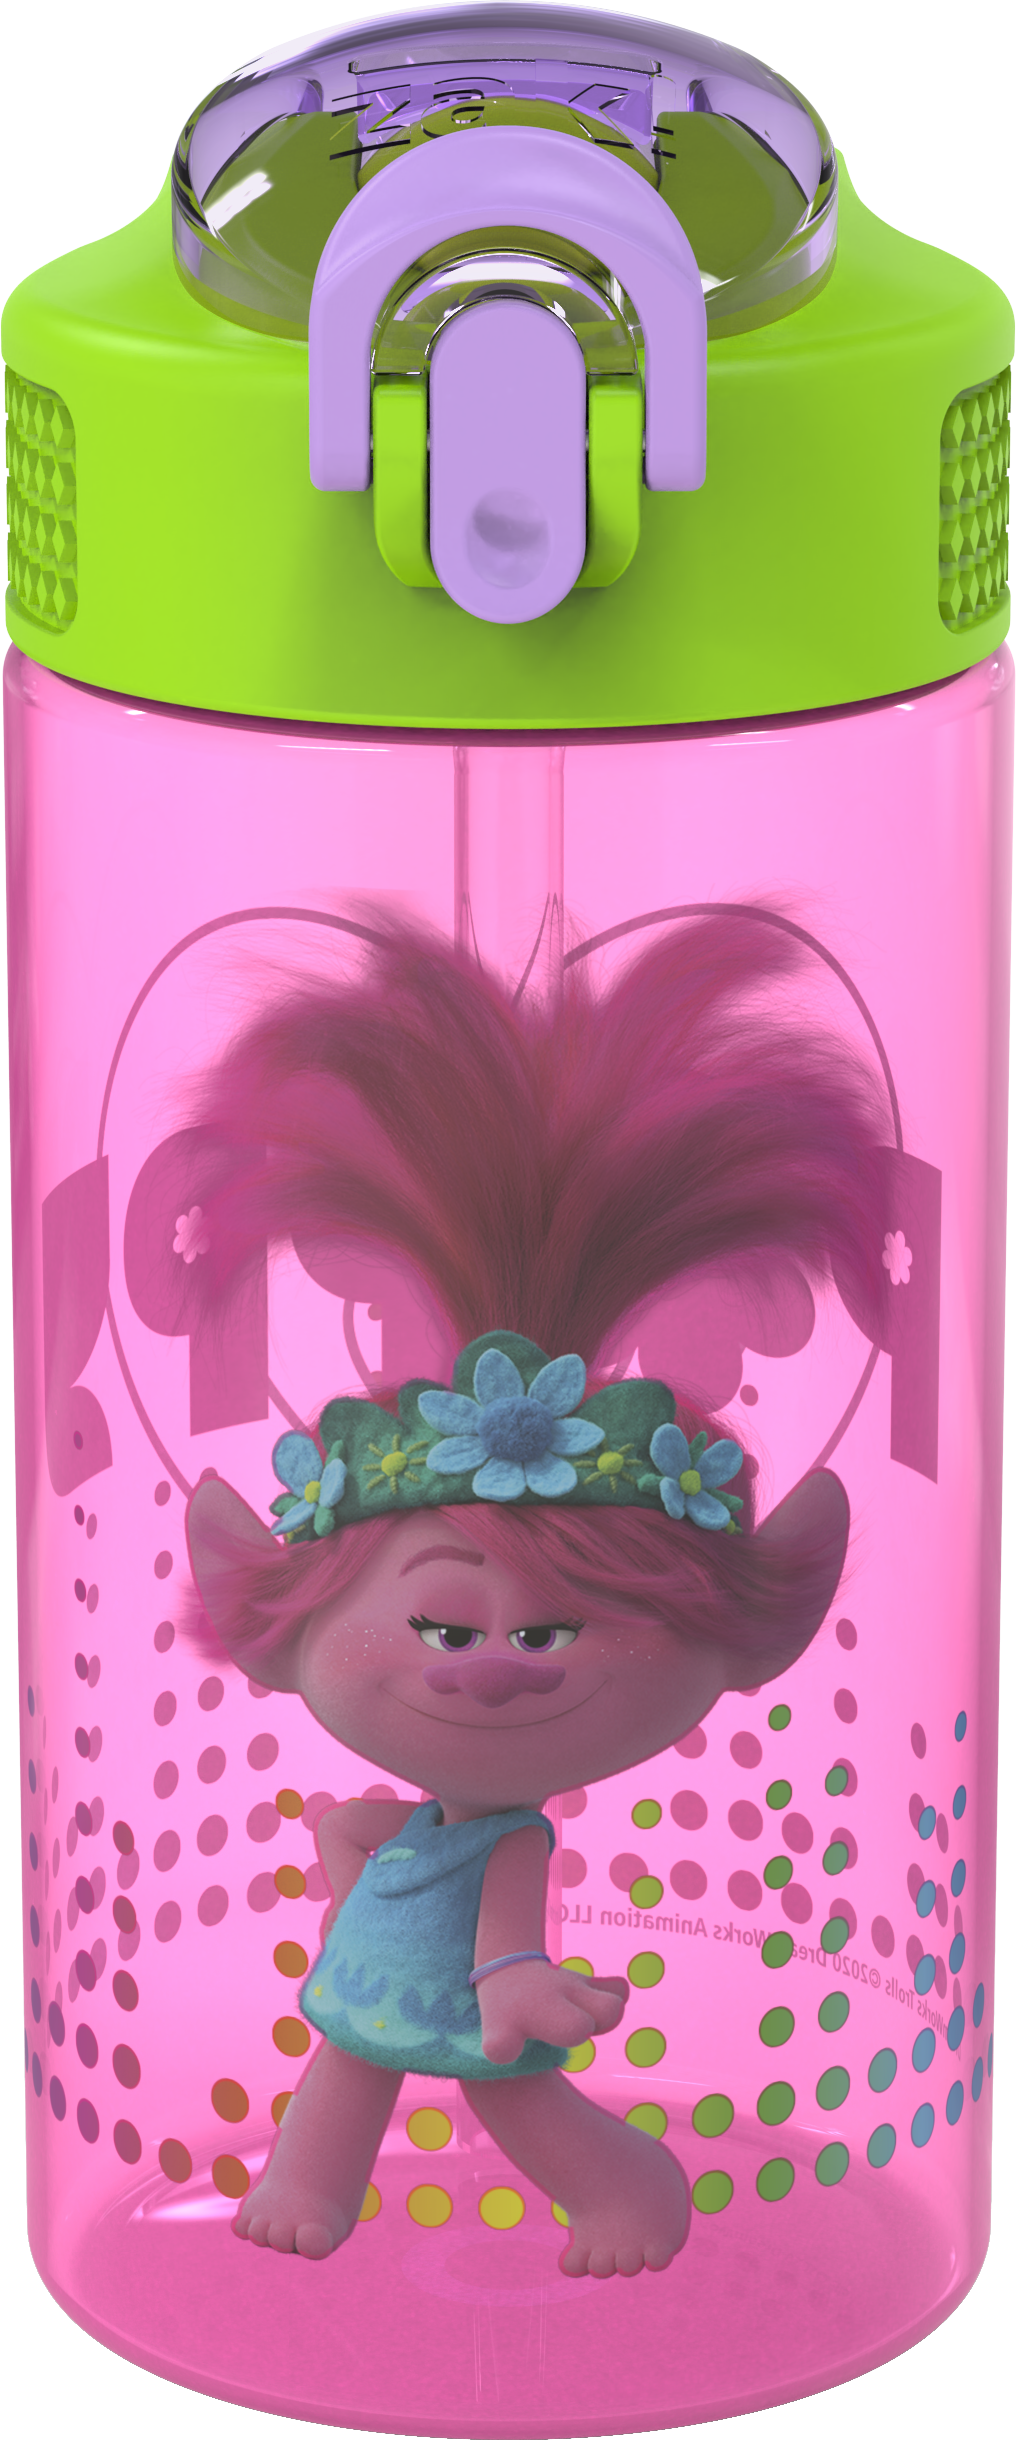 Trolls 2 Movie 16 ounce Reusable Plastic Water Bottle with Straw, Poppy, 2-piece set slideshow image 13